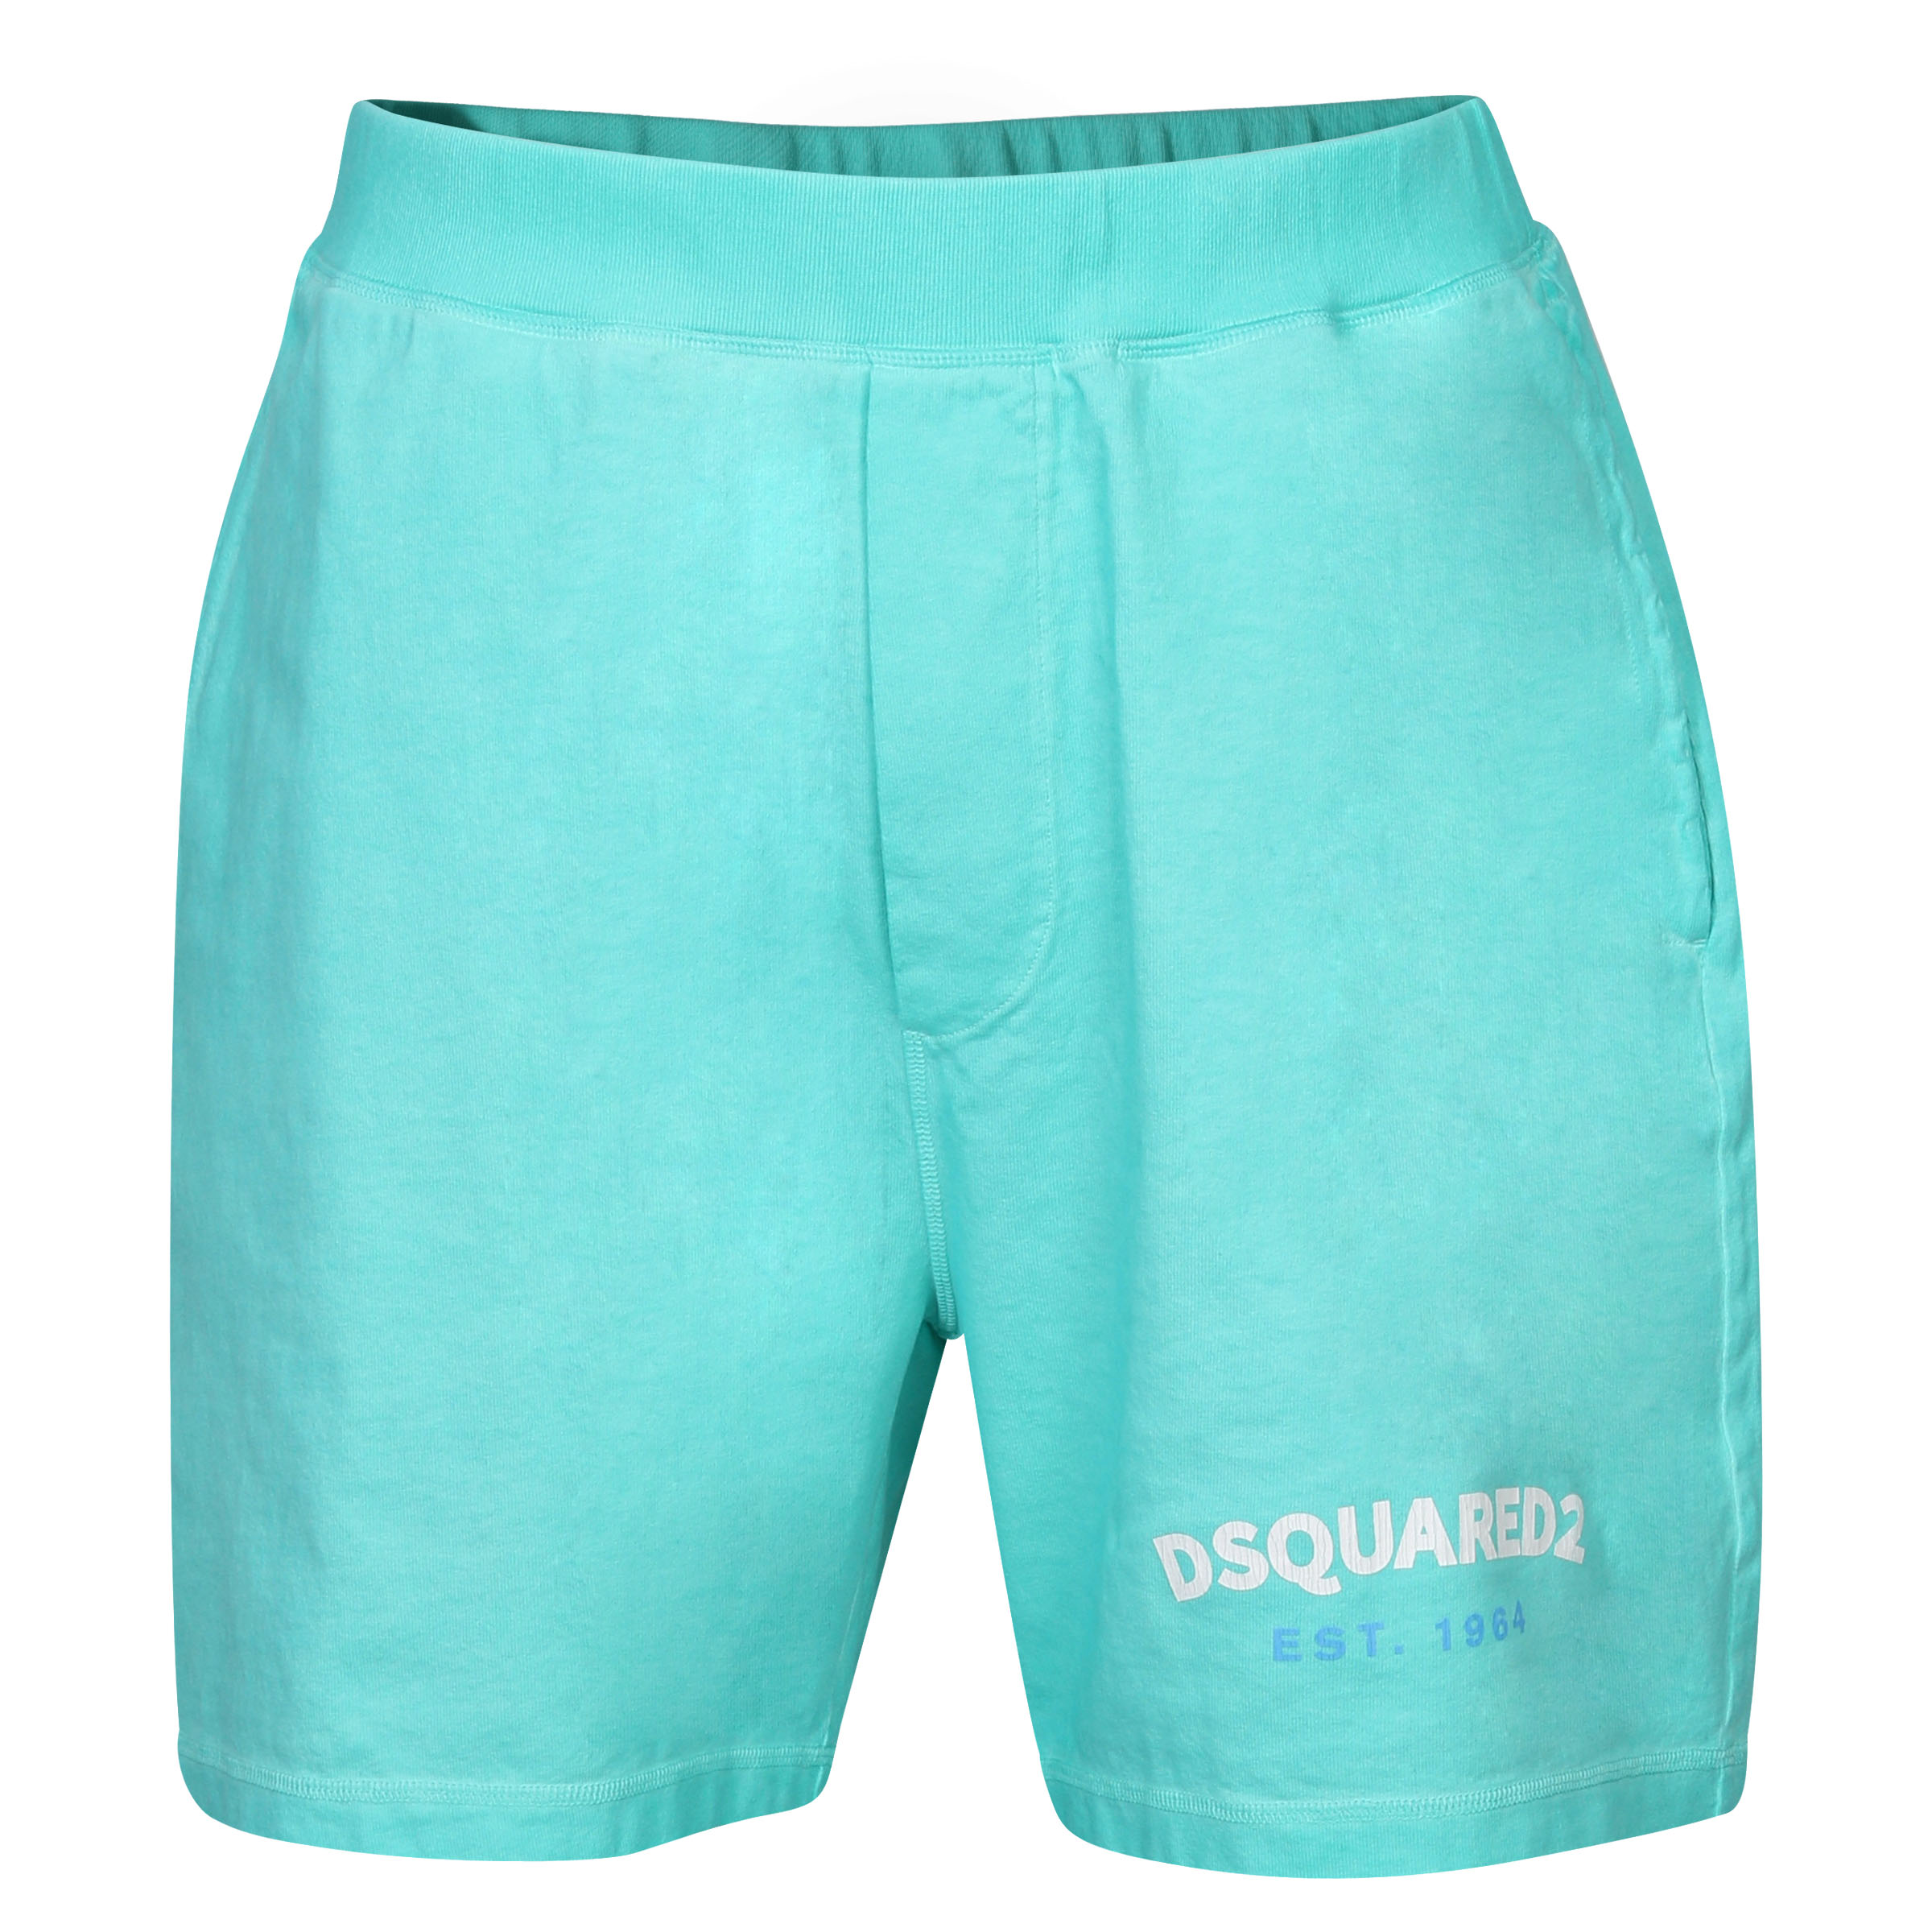 Dsquared Sweat Short Turquoise Printed